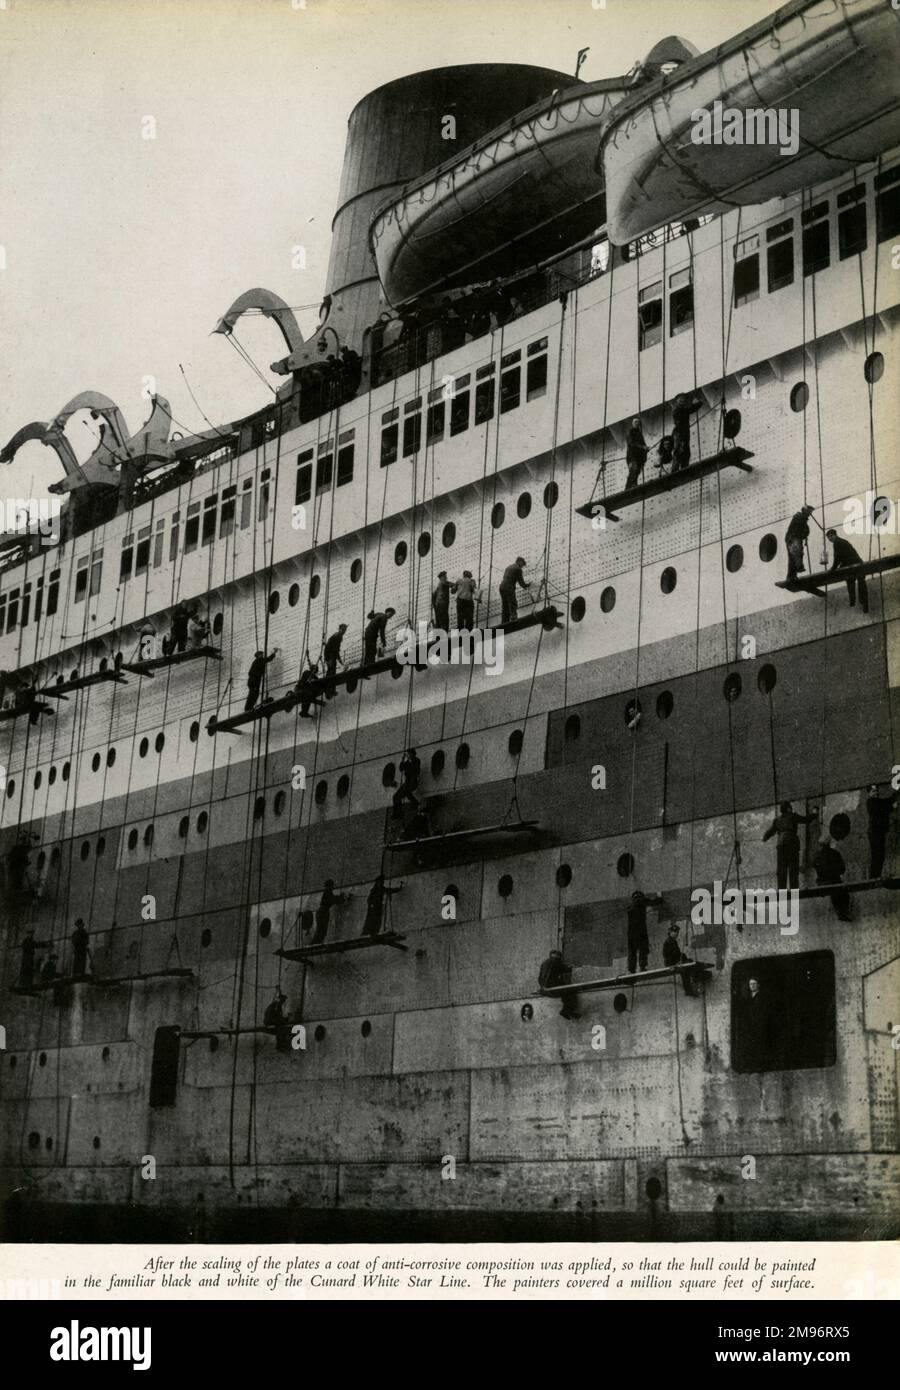 After the scaling of the plates a coat of the anti-corrosive composition was applied, so that the hull could be painted in the black and white of the Cunard White Star Line.  The painters covered a million square feet of surface Stock Photo